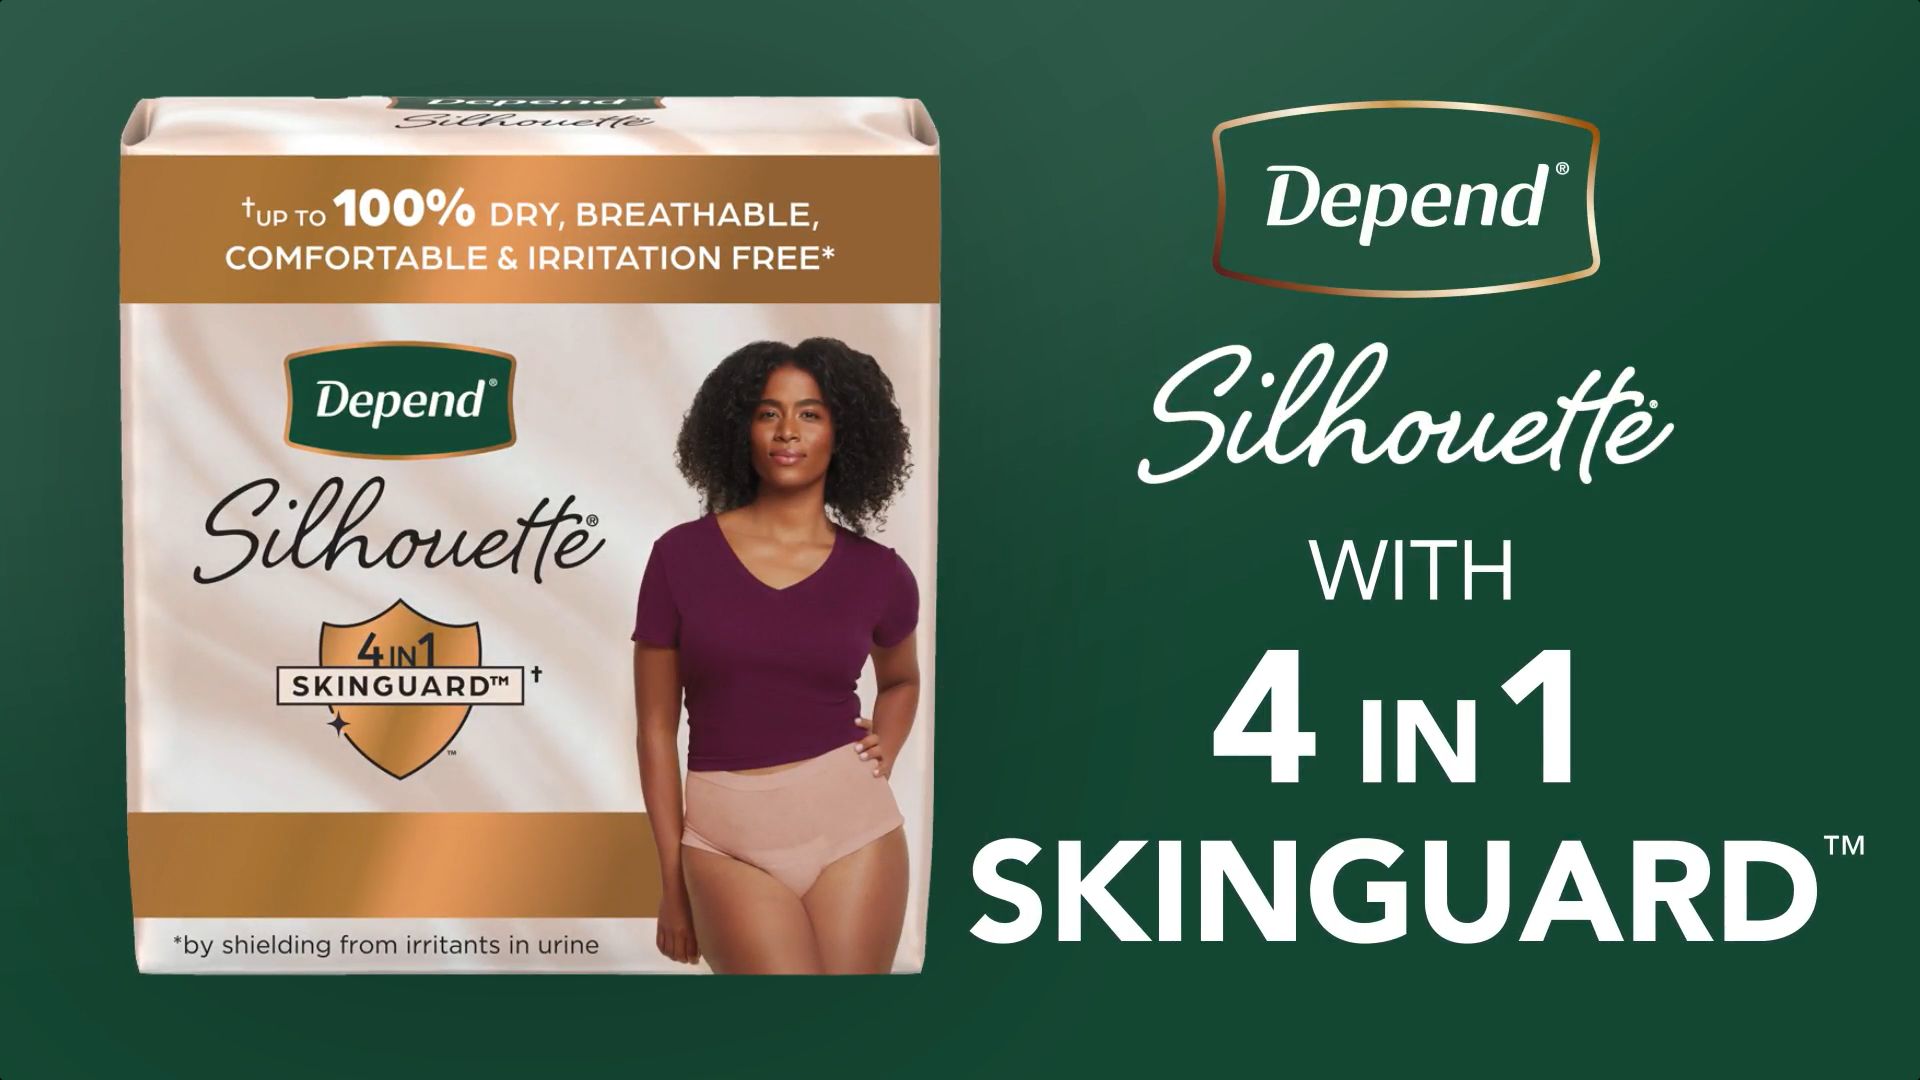 Depend Silhouette Active Fit Incontinence Underwear for Women, Moderate  Absorbency, S/M, 2 Count – BigaMart